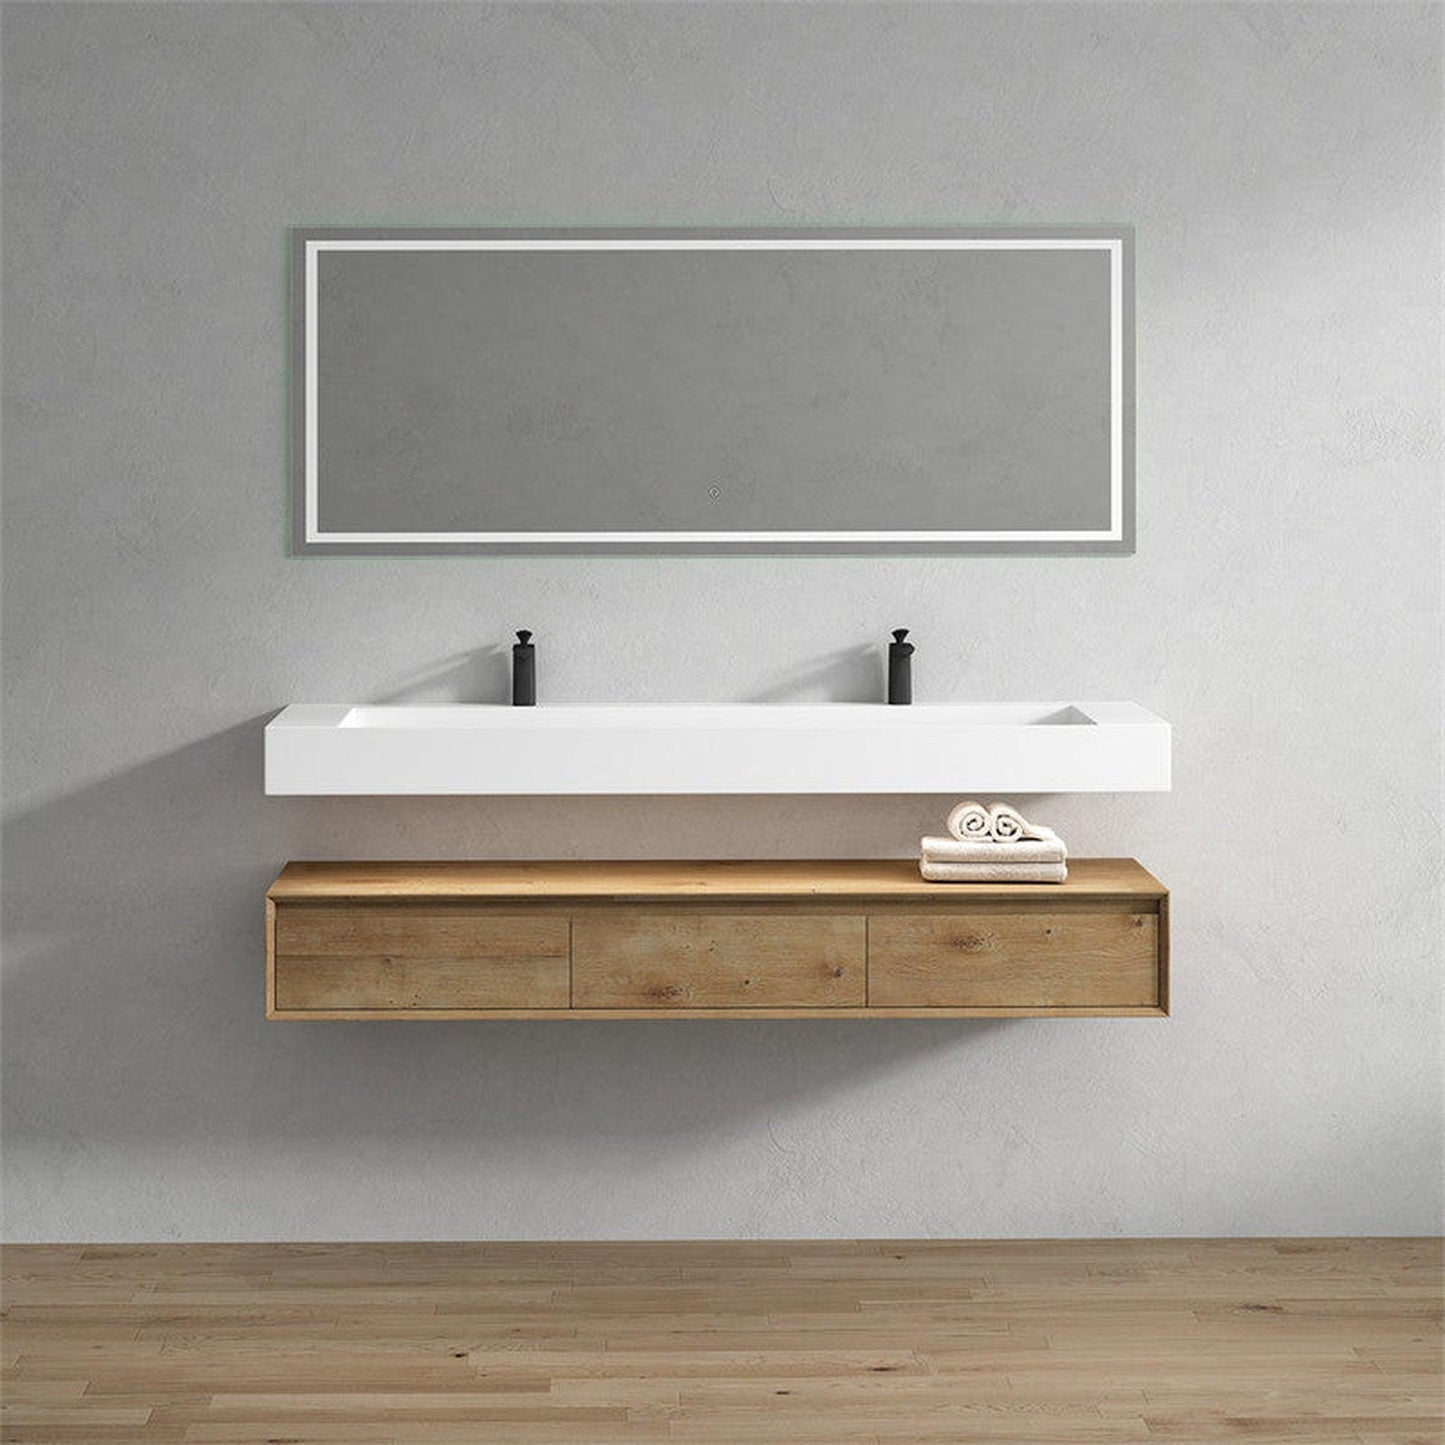 Moreno Bath ALYSA 72" White Oak Floating Vanity With Double Faucet Holes and Reinforced White Acrylic Sink